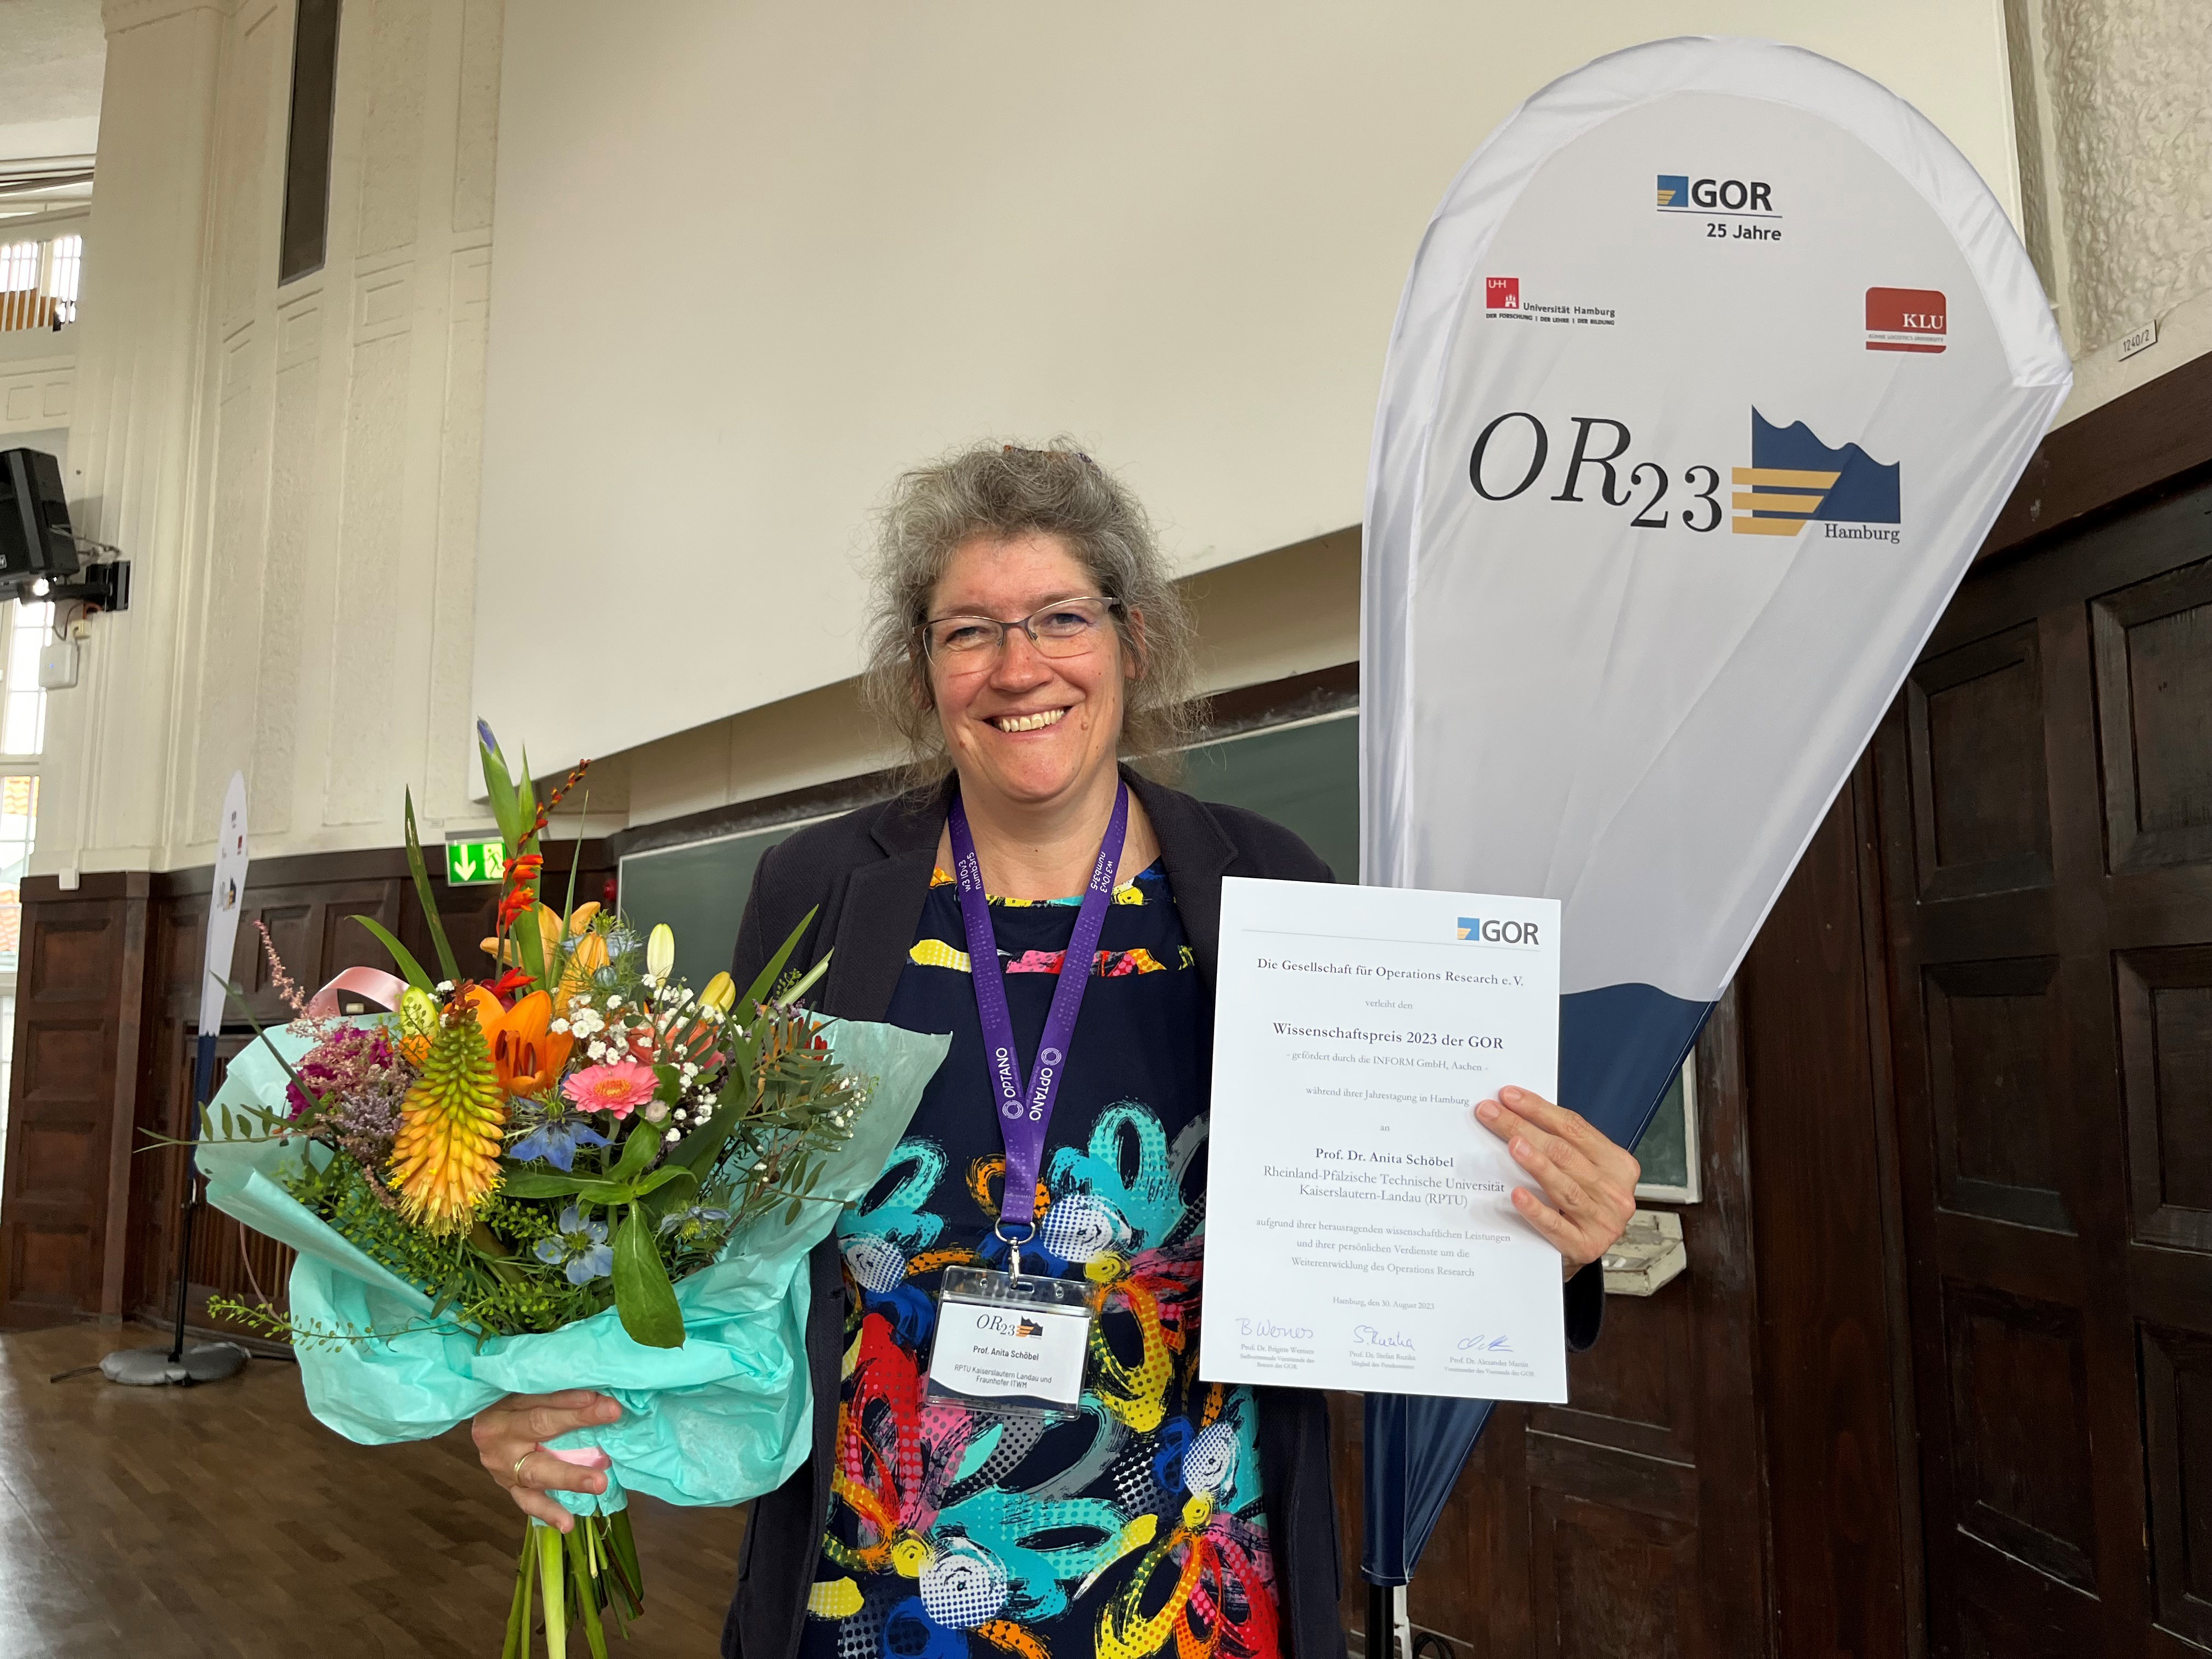 Prof. Dr. Anita Schöbel has been awarded the GOR Prize 2023.